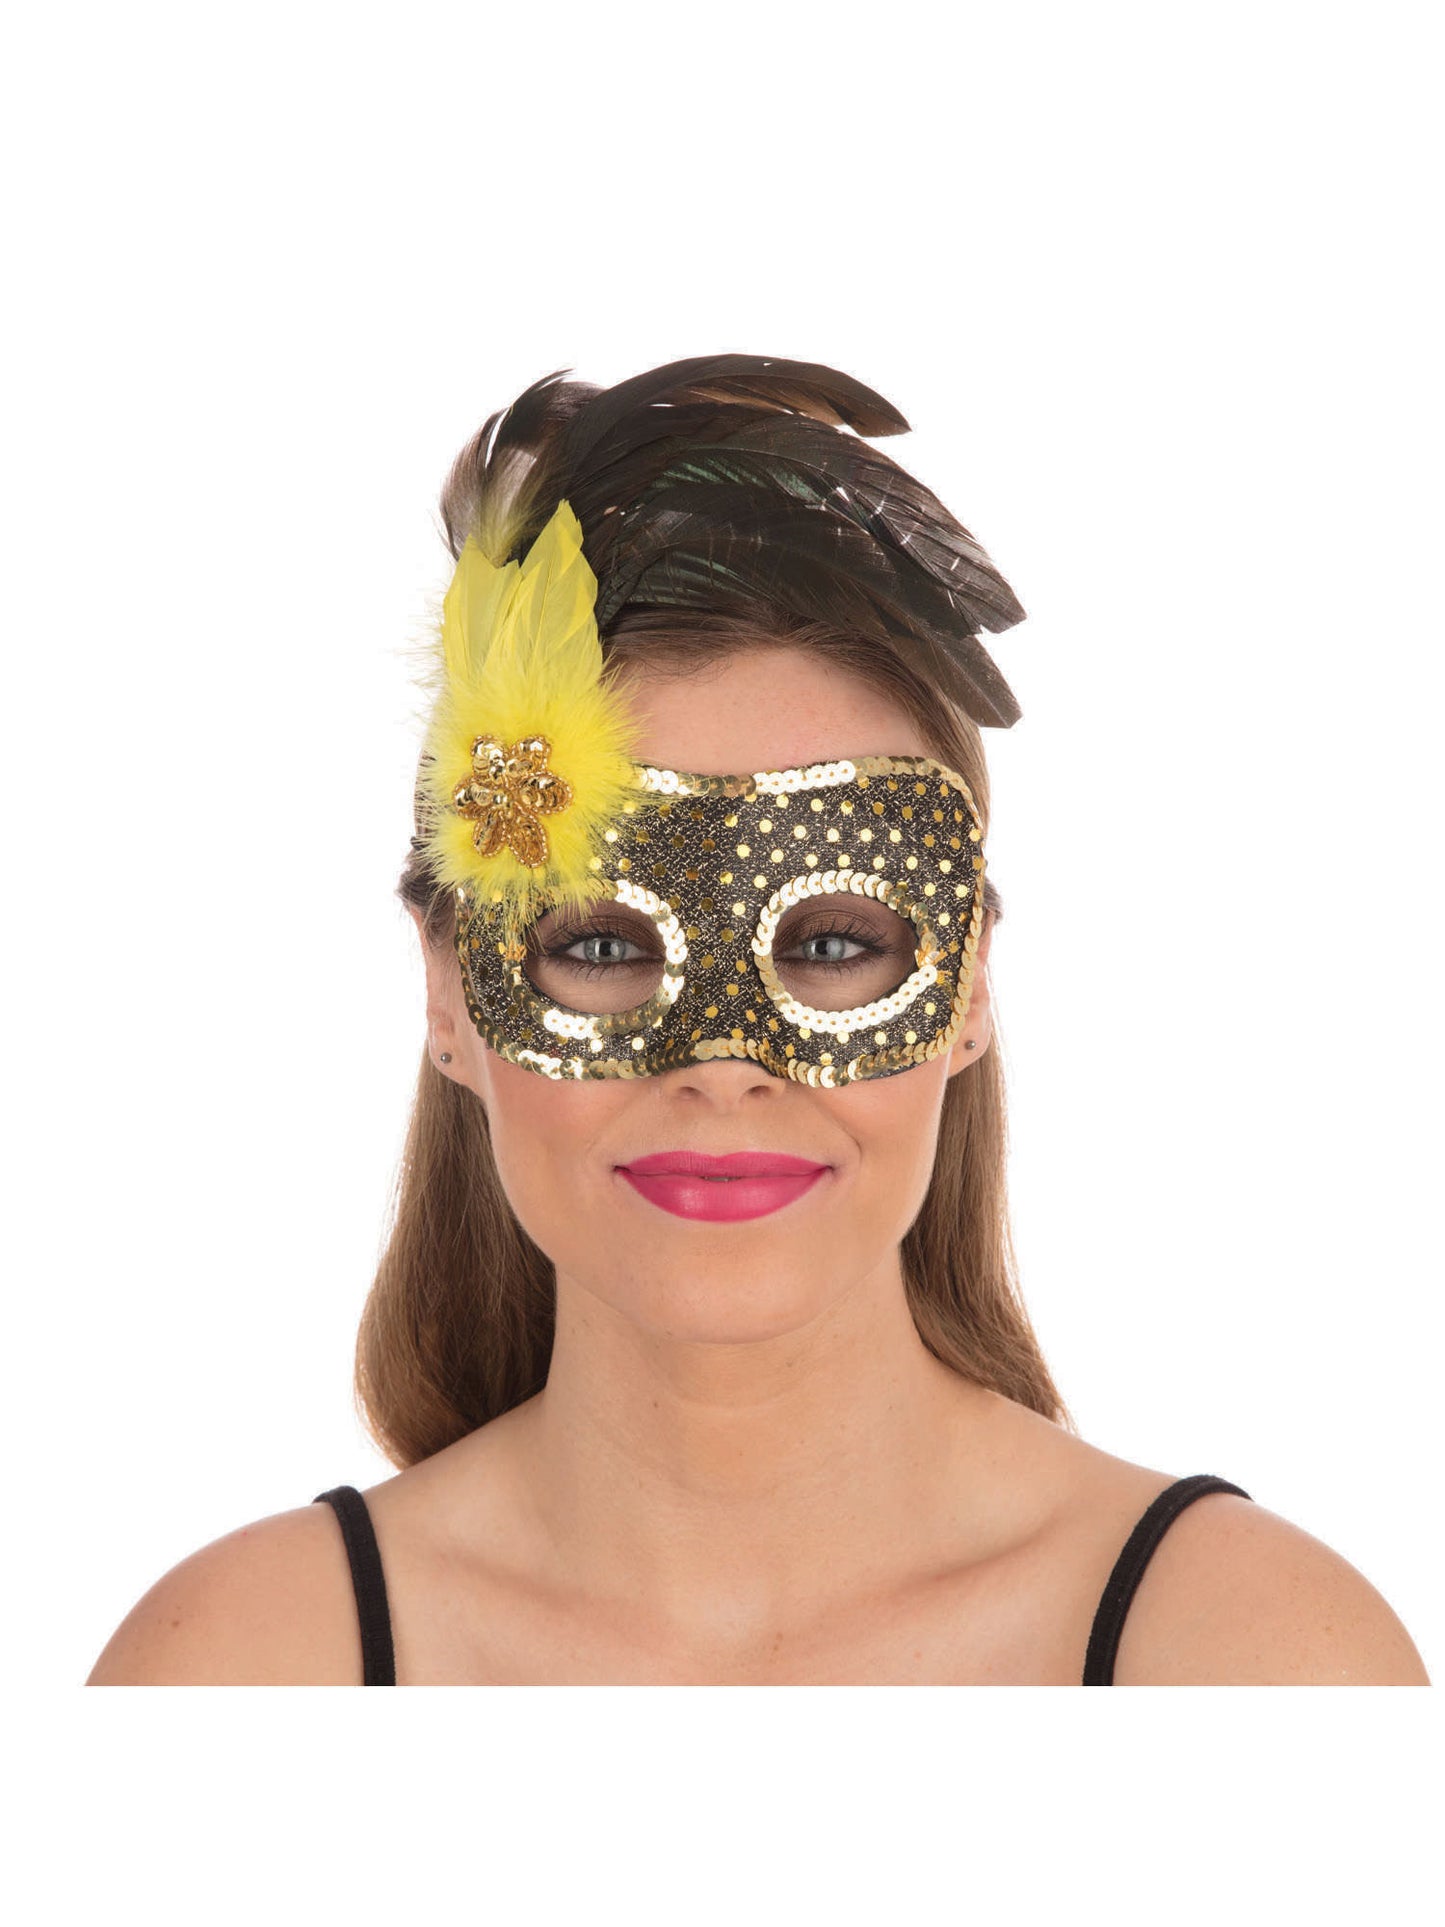 Black/Gold Sequin Mask & Yellow Feathers